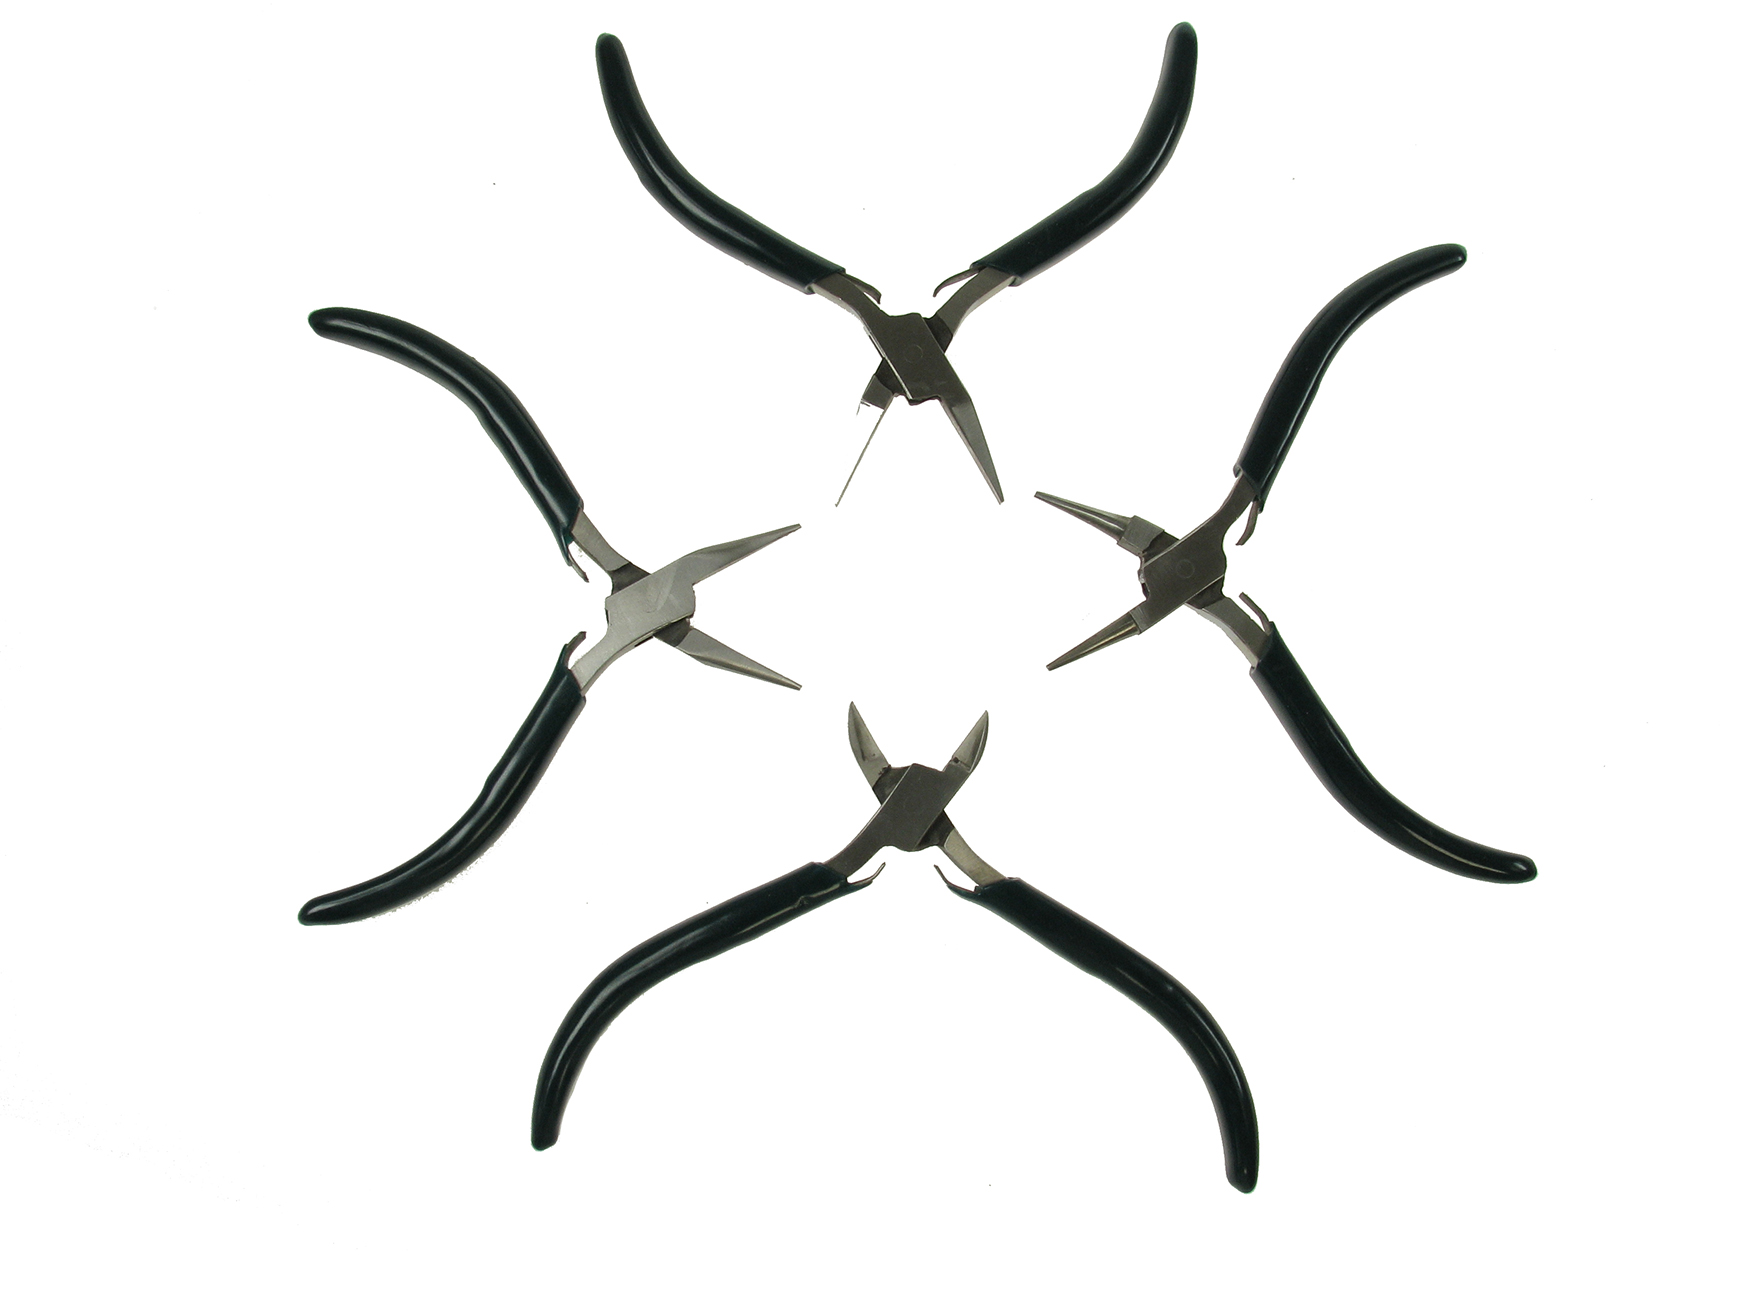 Pliers set with 4 pliers